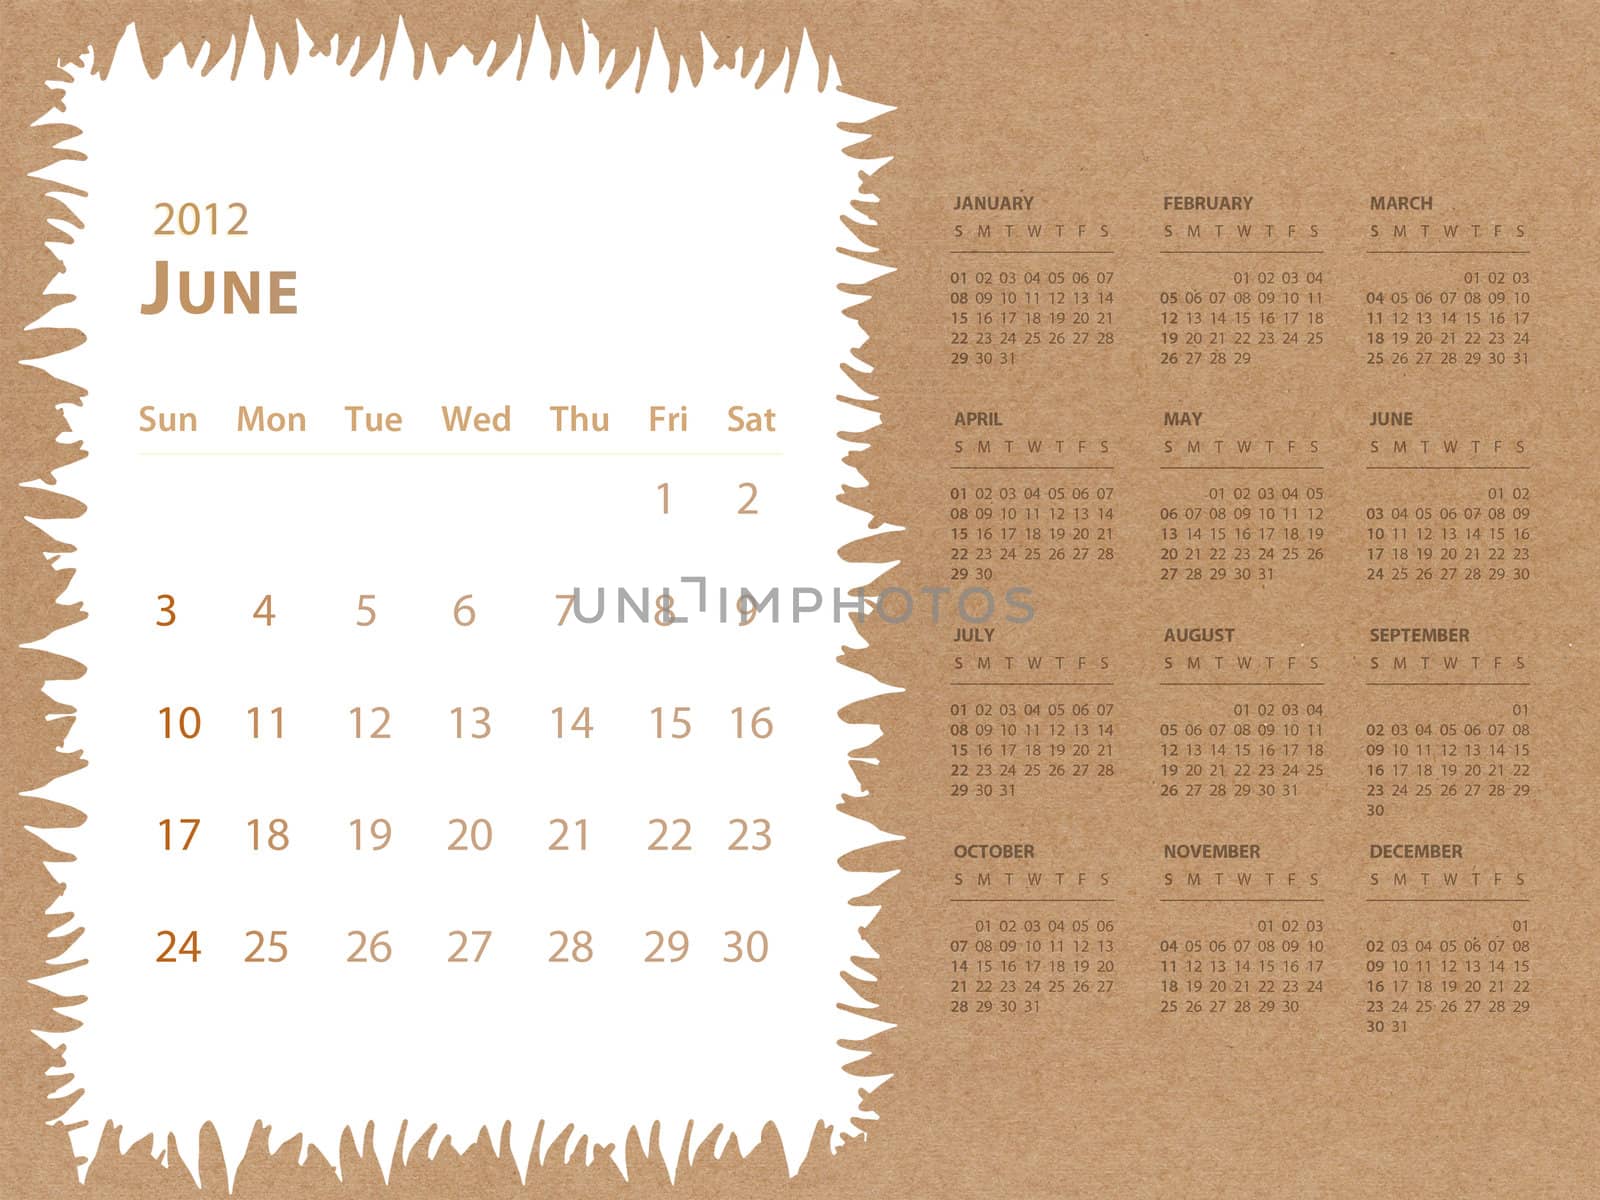 June of 2012 calendar with recycle paper background by jakgree